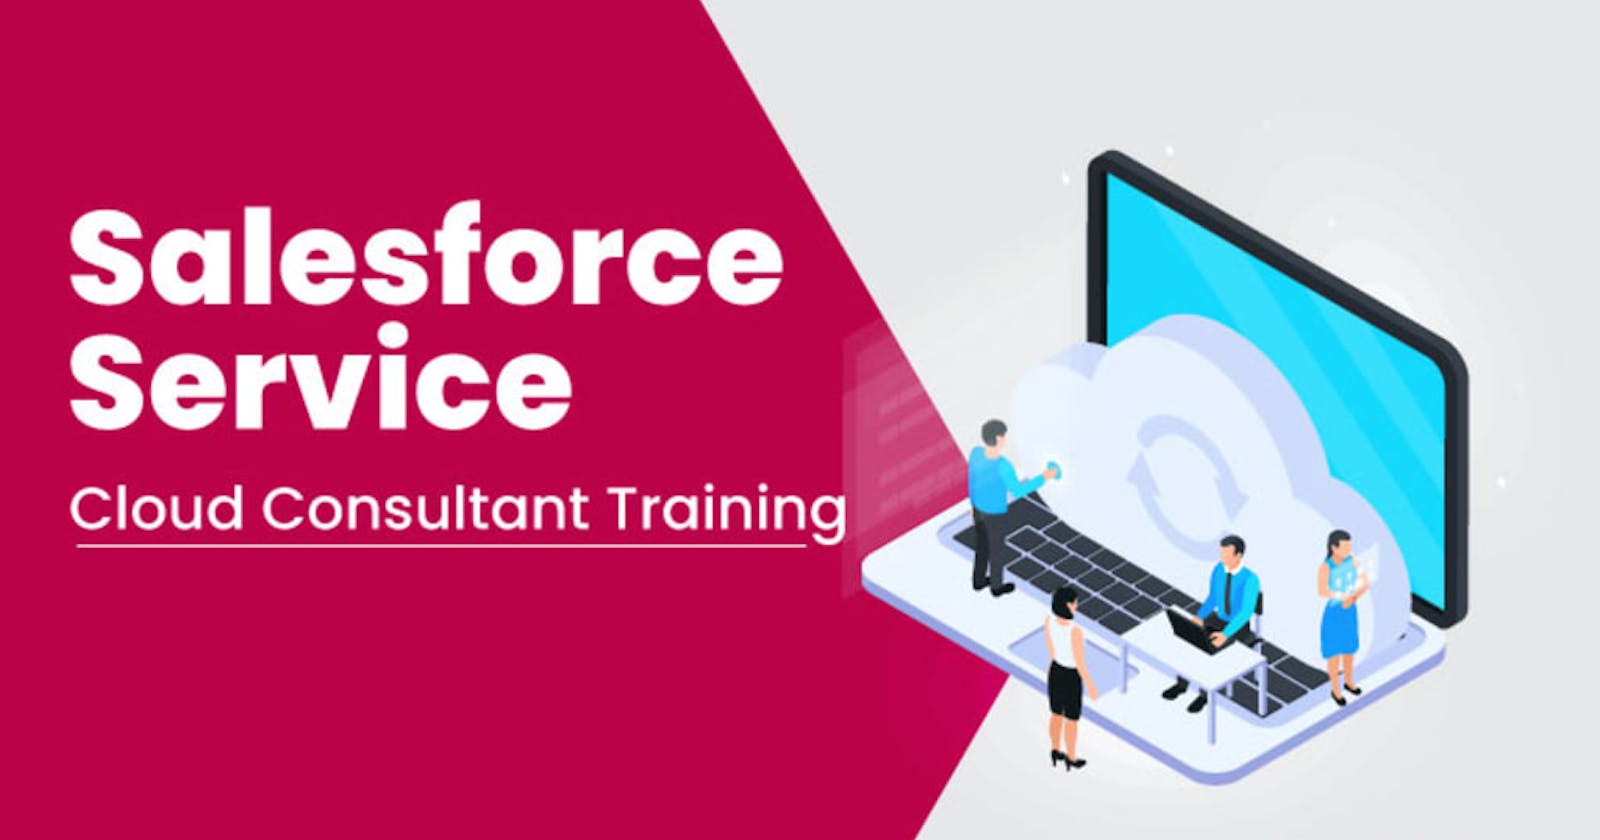 What are the skills and responsibilities of a Salesforce Service Cloud Consultant?